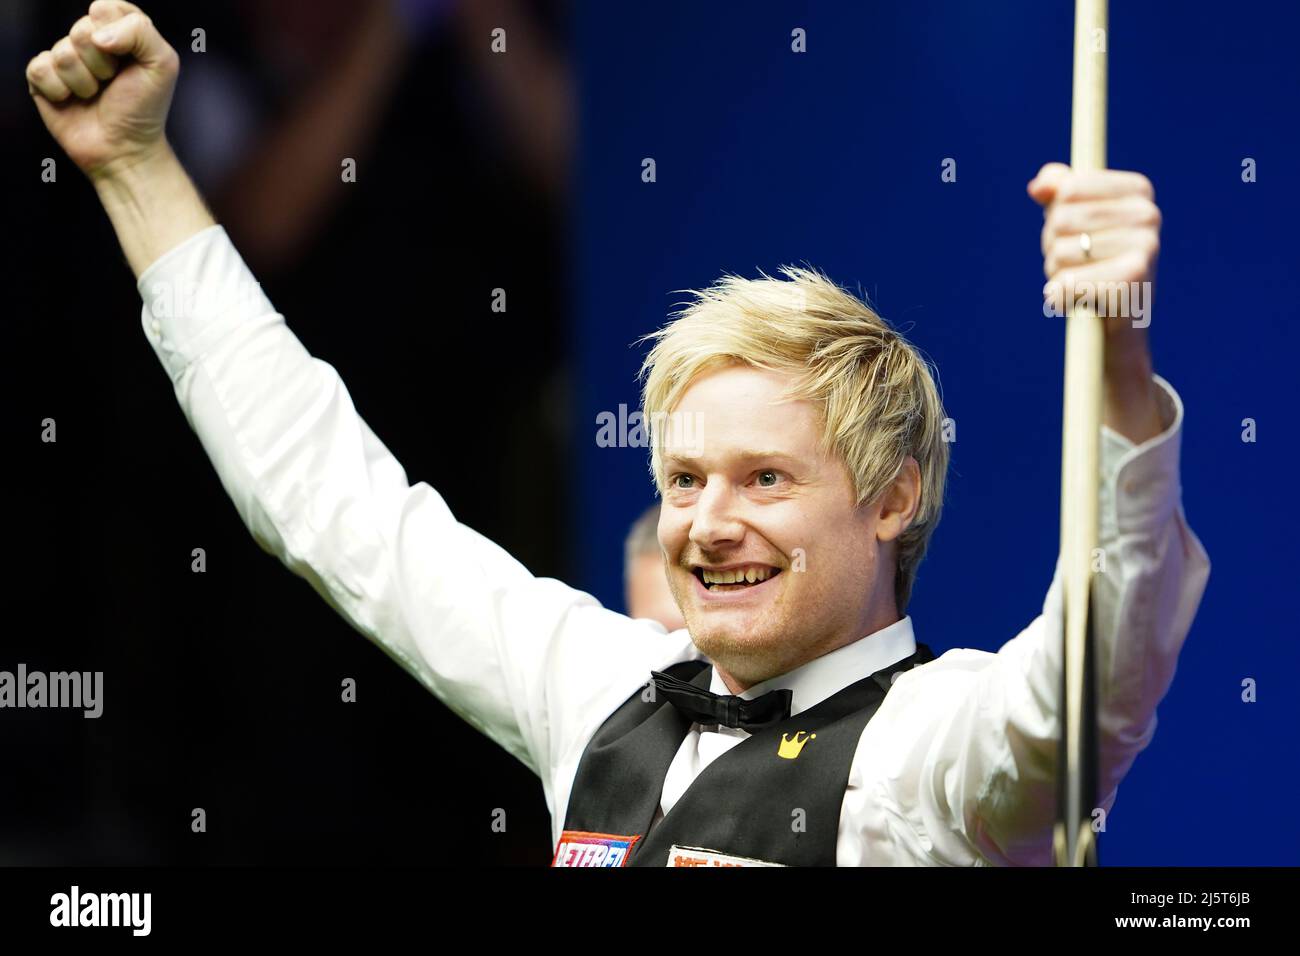 Australias Neil Robertson celebrates making a 147 against Englands Jack Lisowski during day ten of the Betfred World Snooker Championships at The Crucible, Sheffield